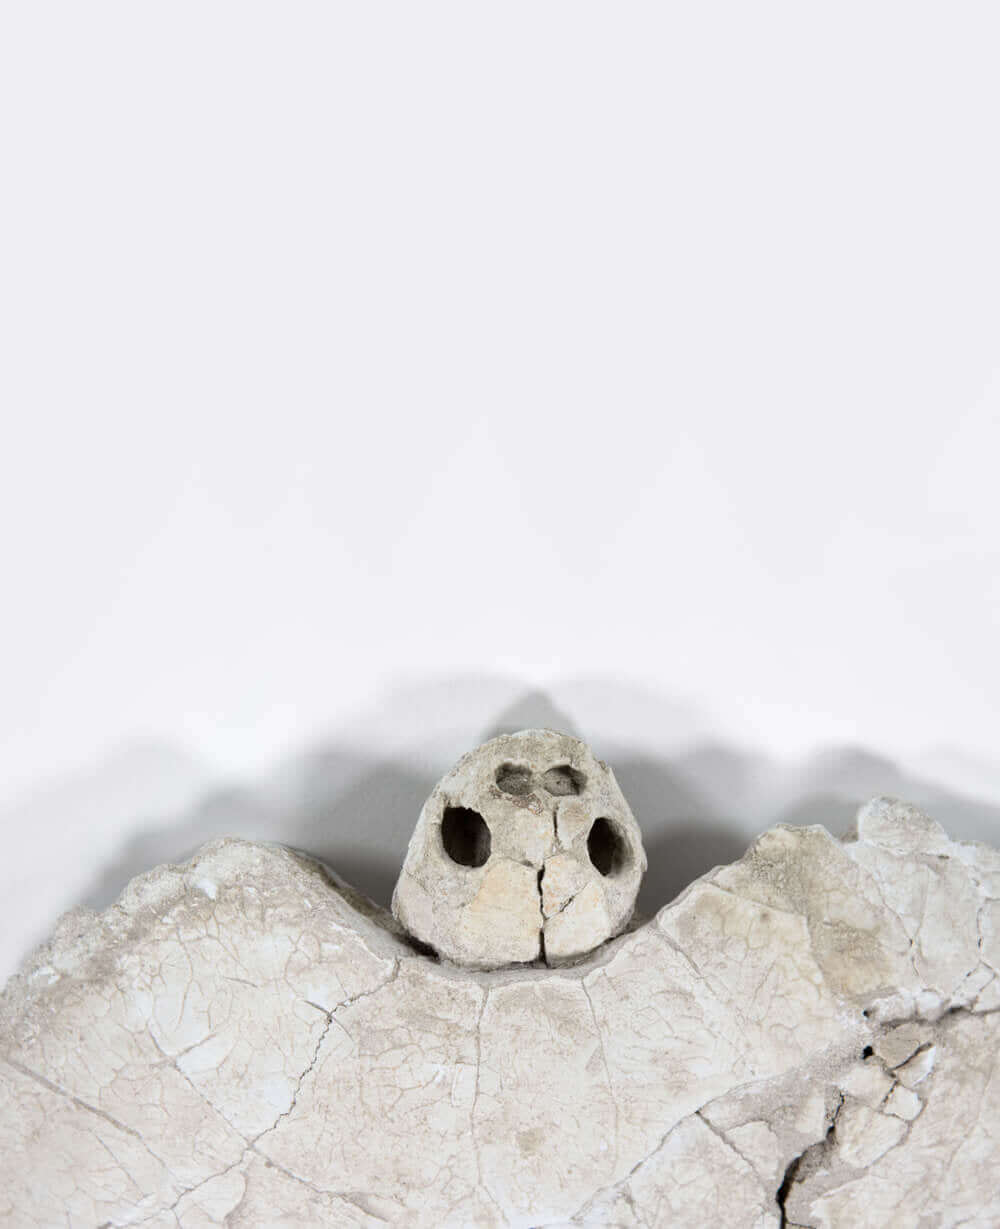 A rare side-necked Bothremydidae turtle skull fossil for sale and carapace shell available at THE FOSSIL STORE